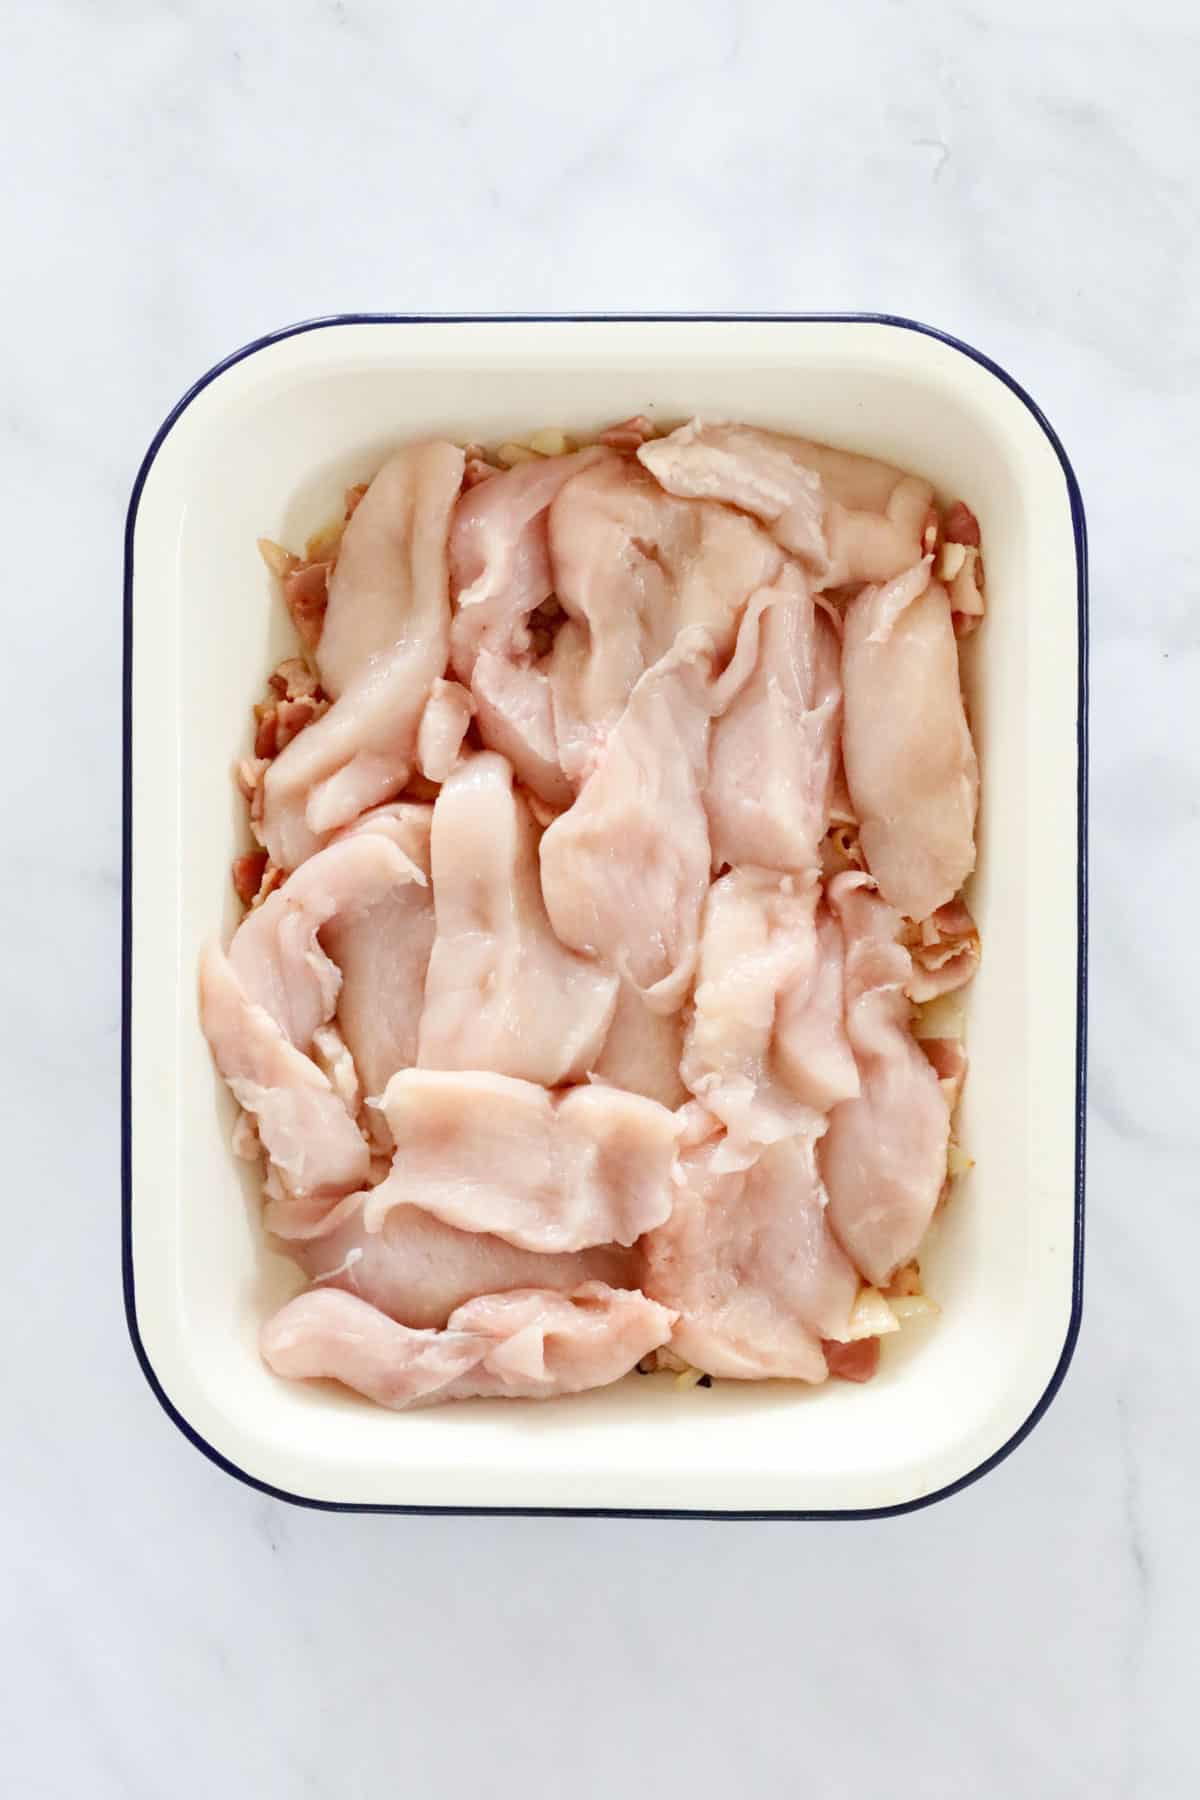 Cut raw chicken breasts on top of bacon and onions in a casserole dish.